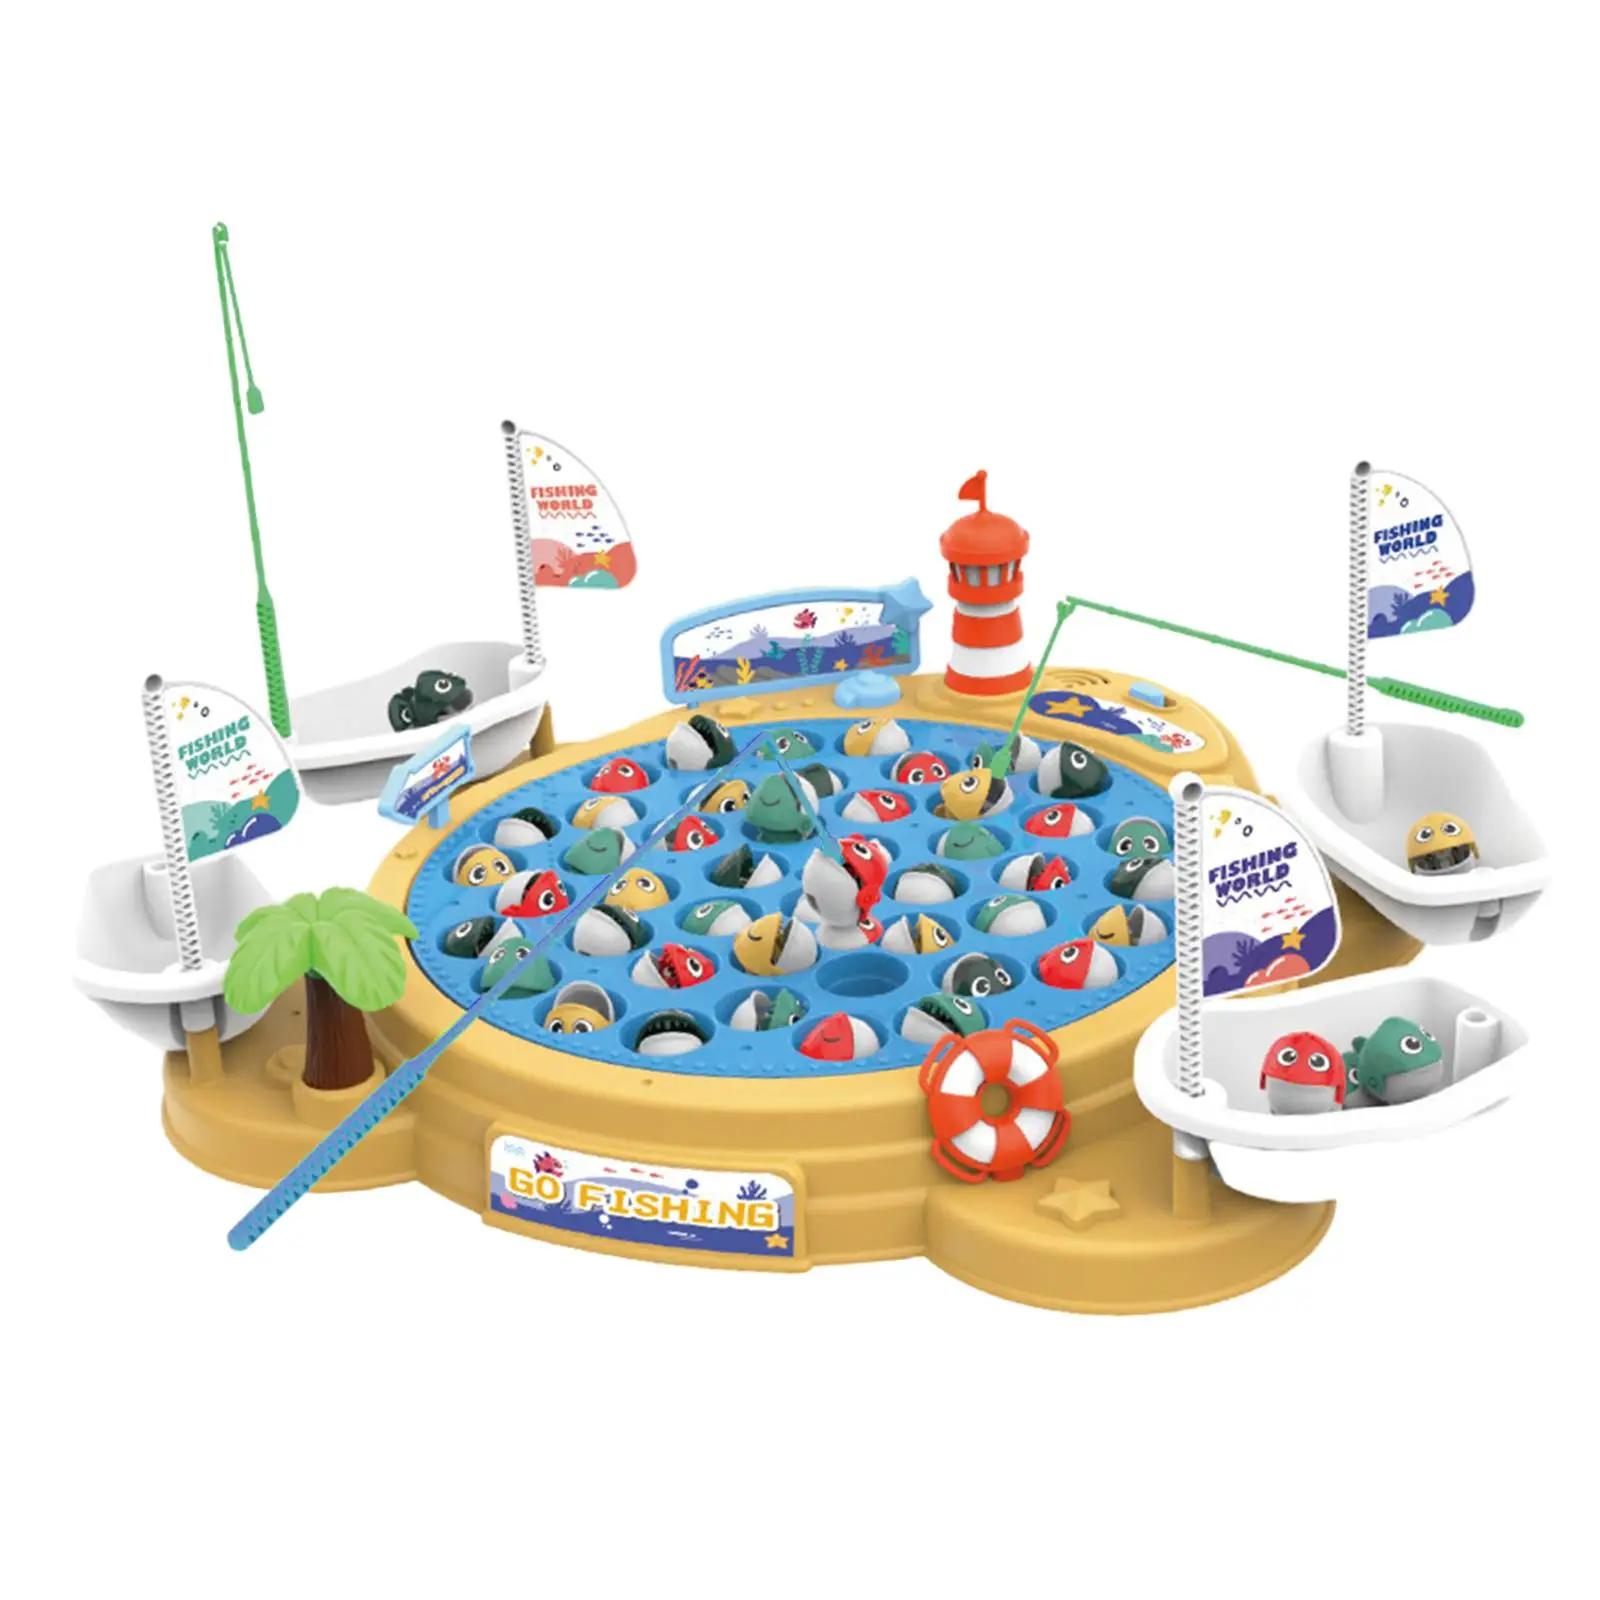 Rotating Fishing Game Toy Novelty including Fishes and Fishing Poles Rotating Board Game for Children Kids Girls Birthday Gifts